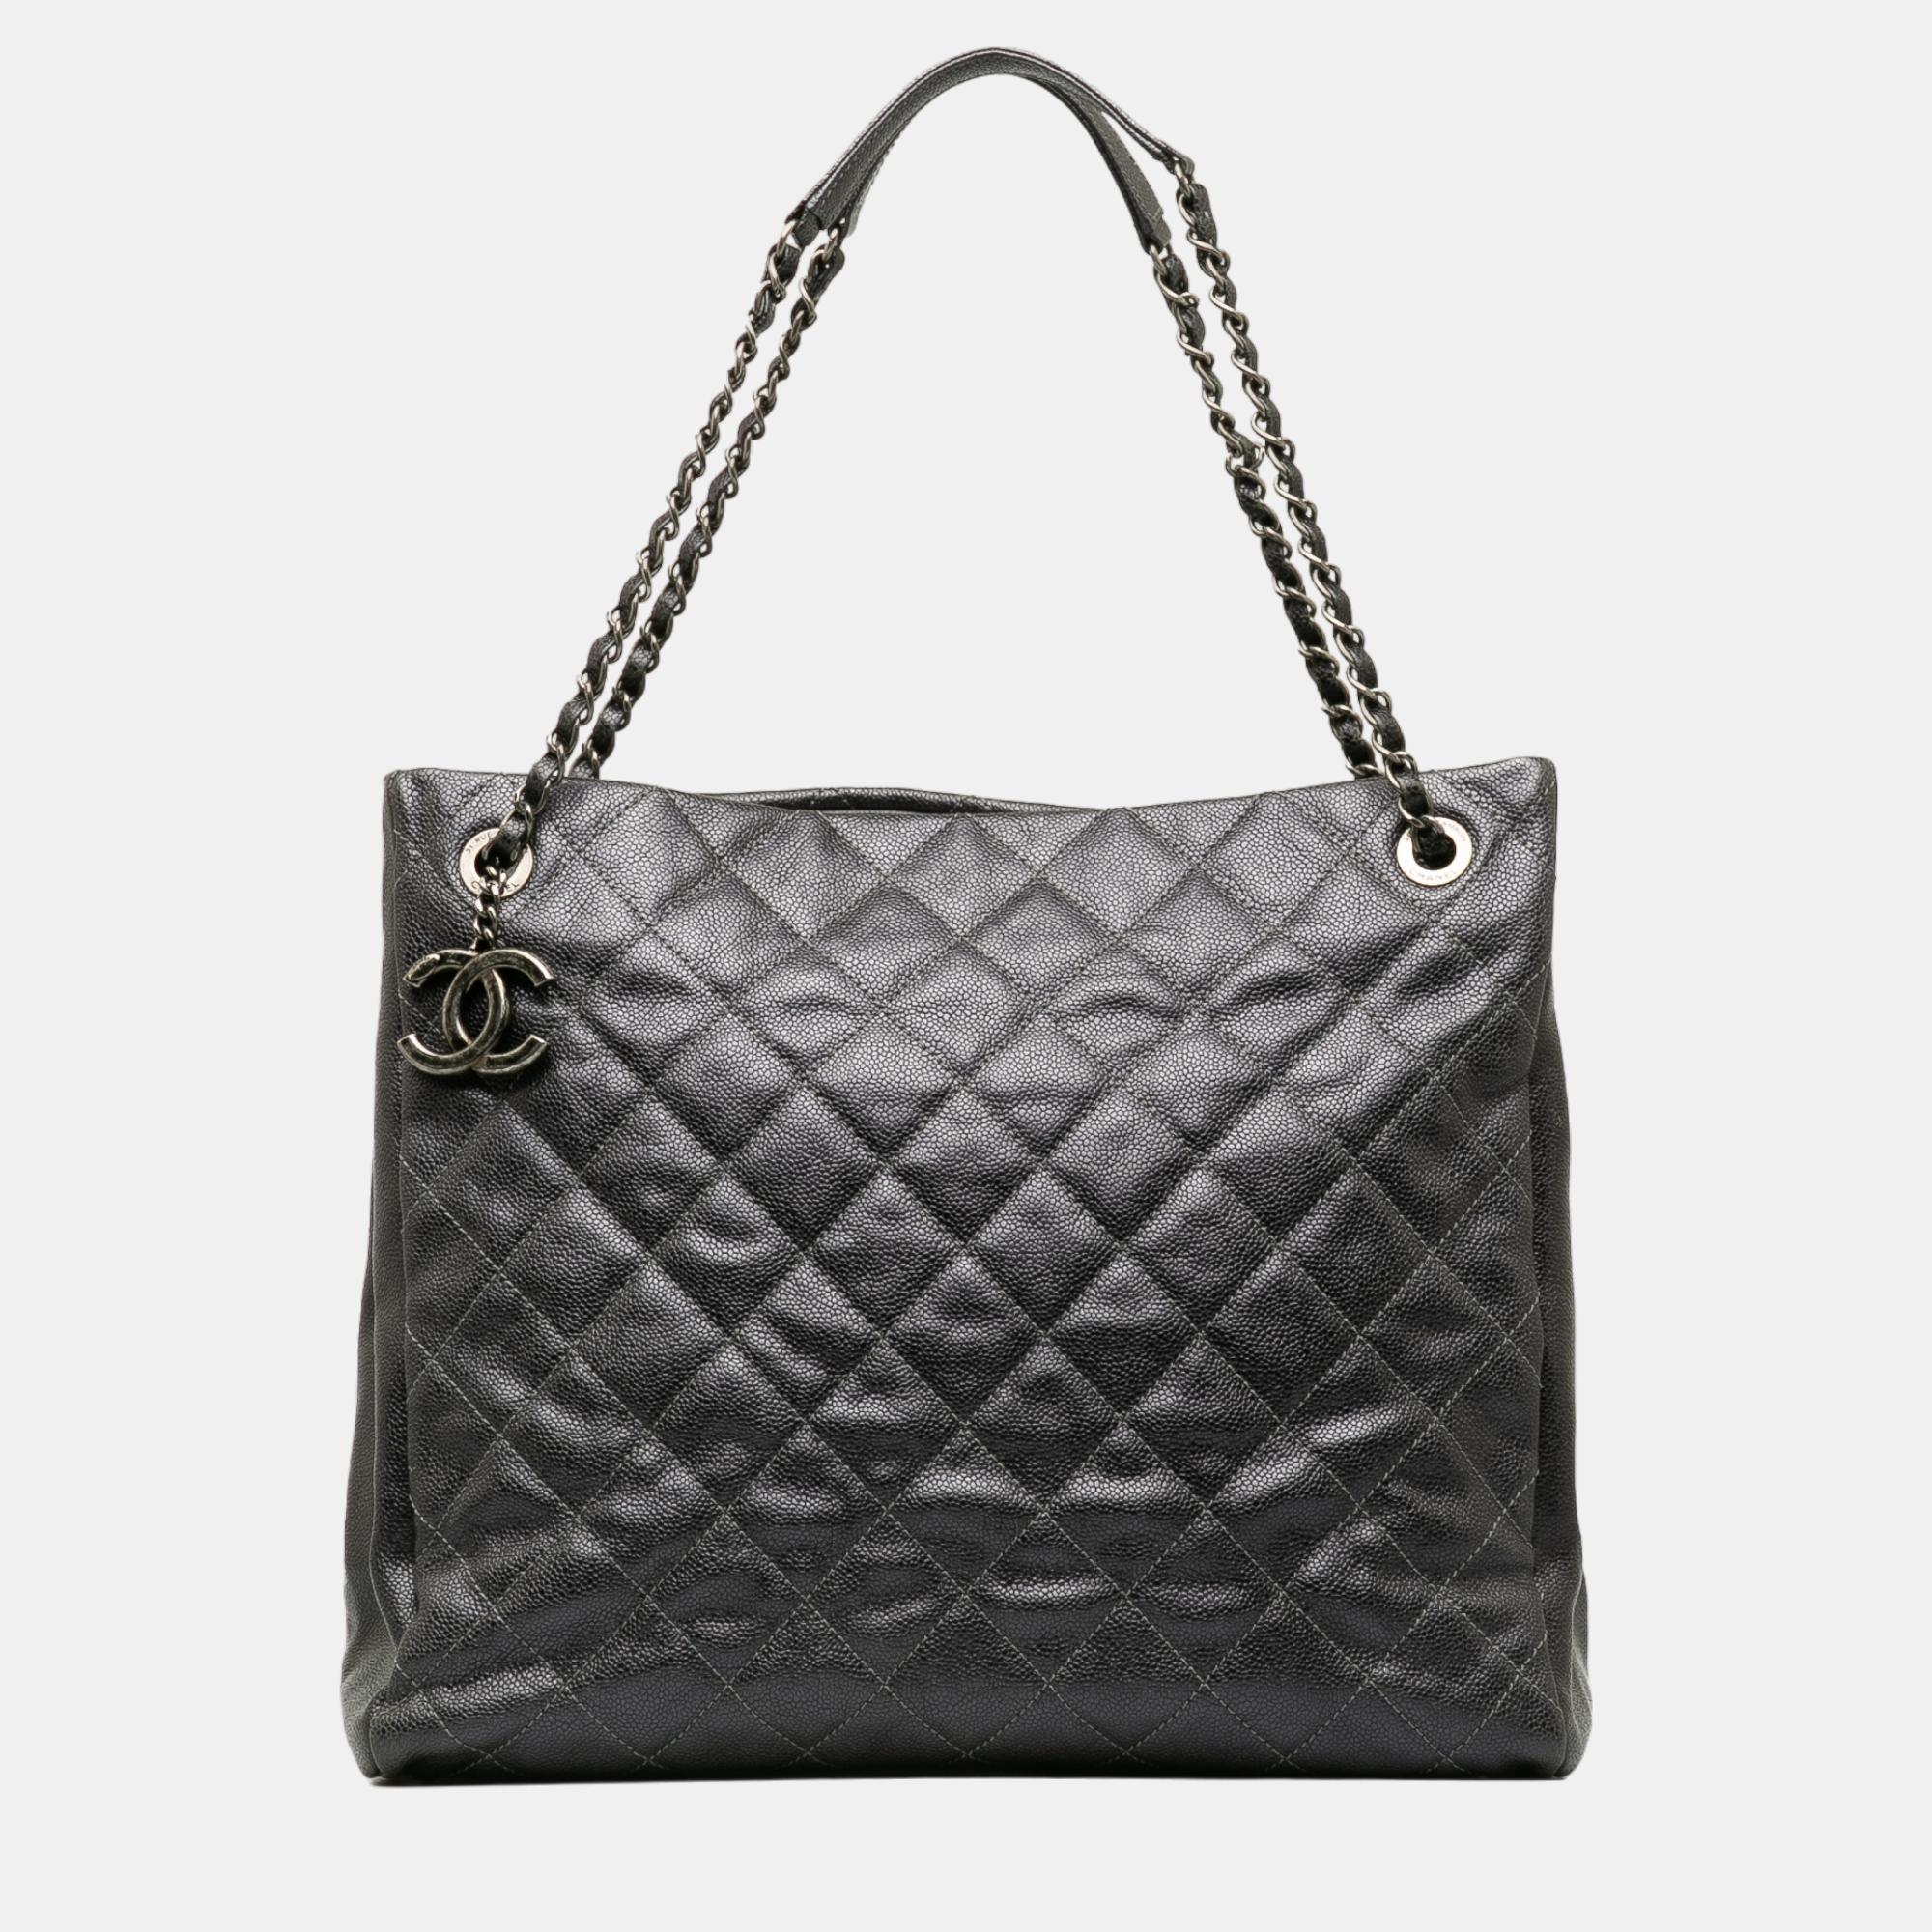 Chanel black large caviar chic shopping tote